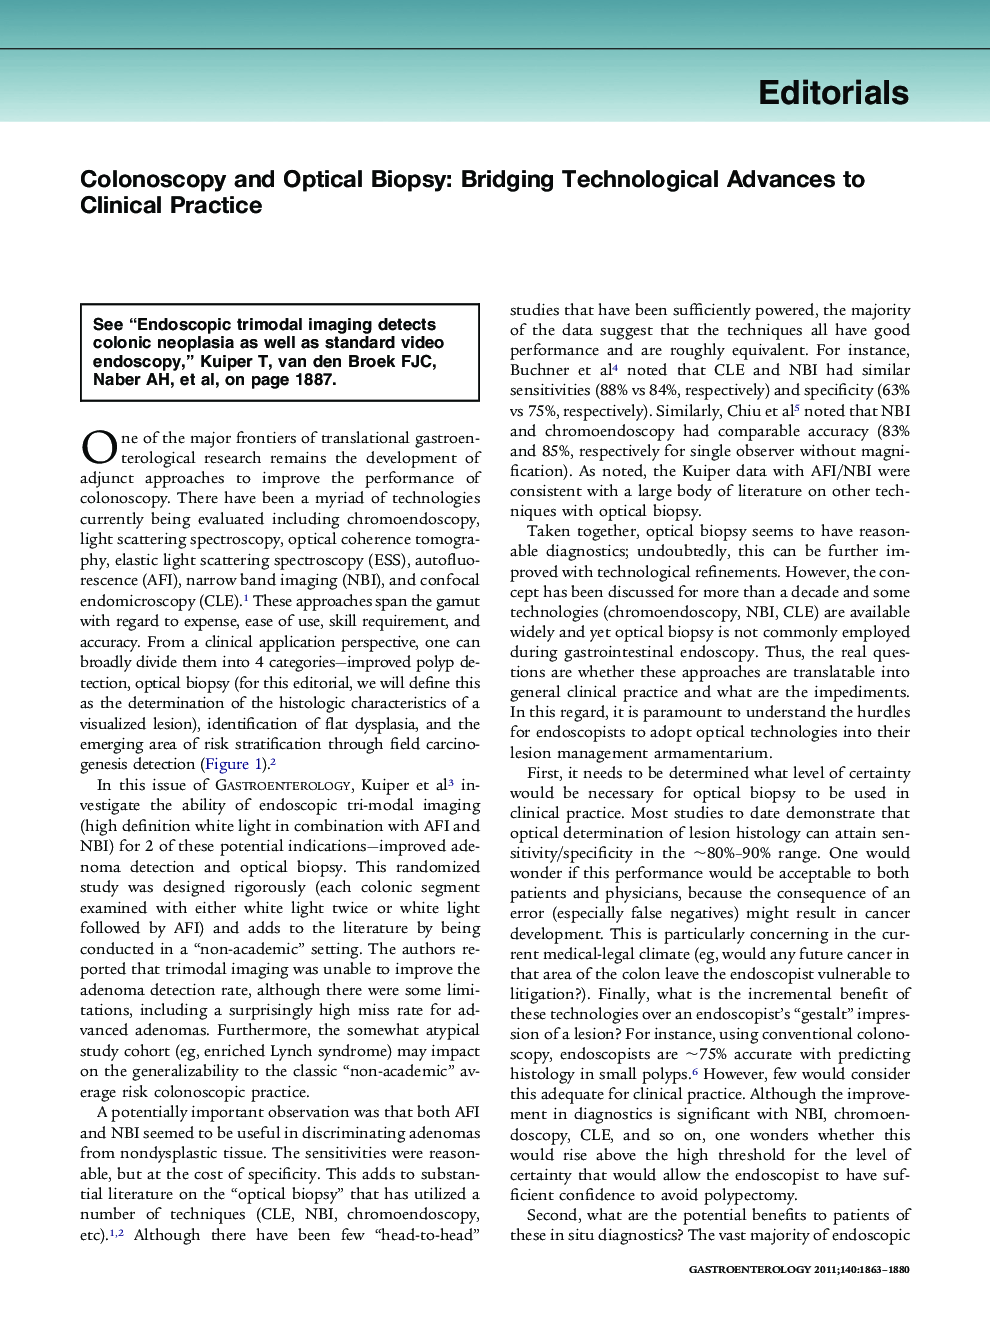 Colonoscopy and Optical Biopsy: Bridging Technological Advances to Clinical Practice